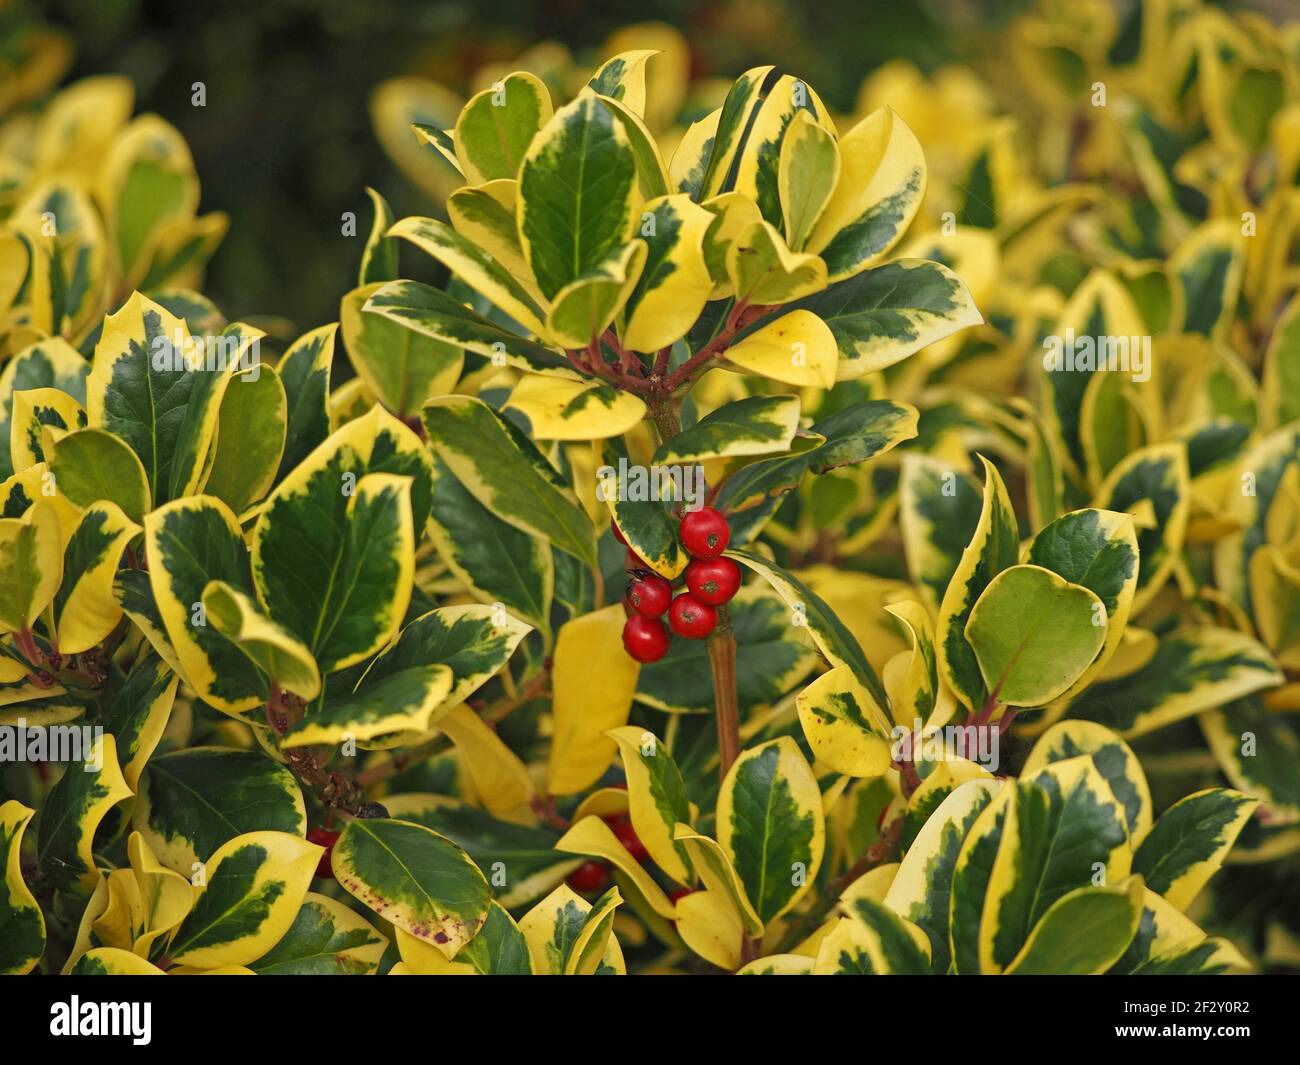 green & yellow leaves of Variegated Holly (Ilex x altaclerensis - Golden King) with bright red berries in  Cumbria, England, UK Stock Photo